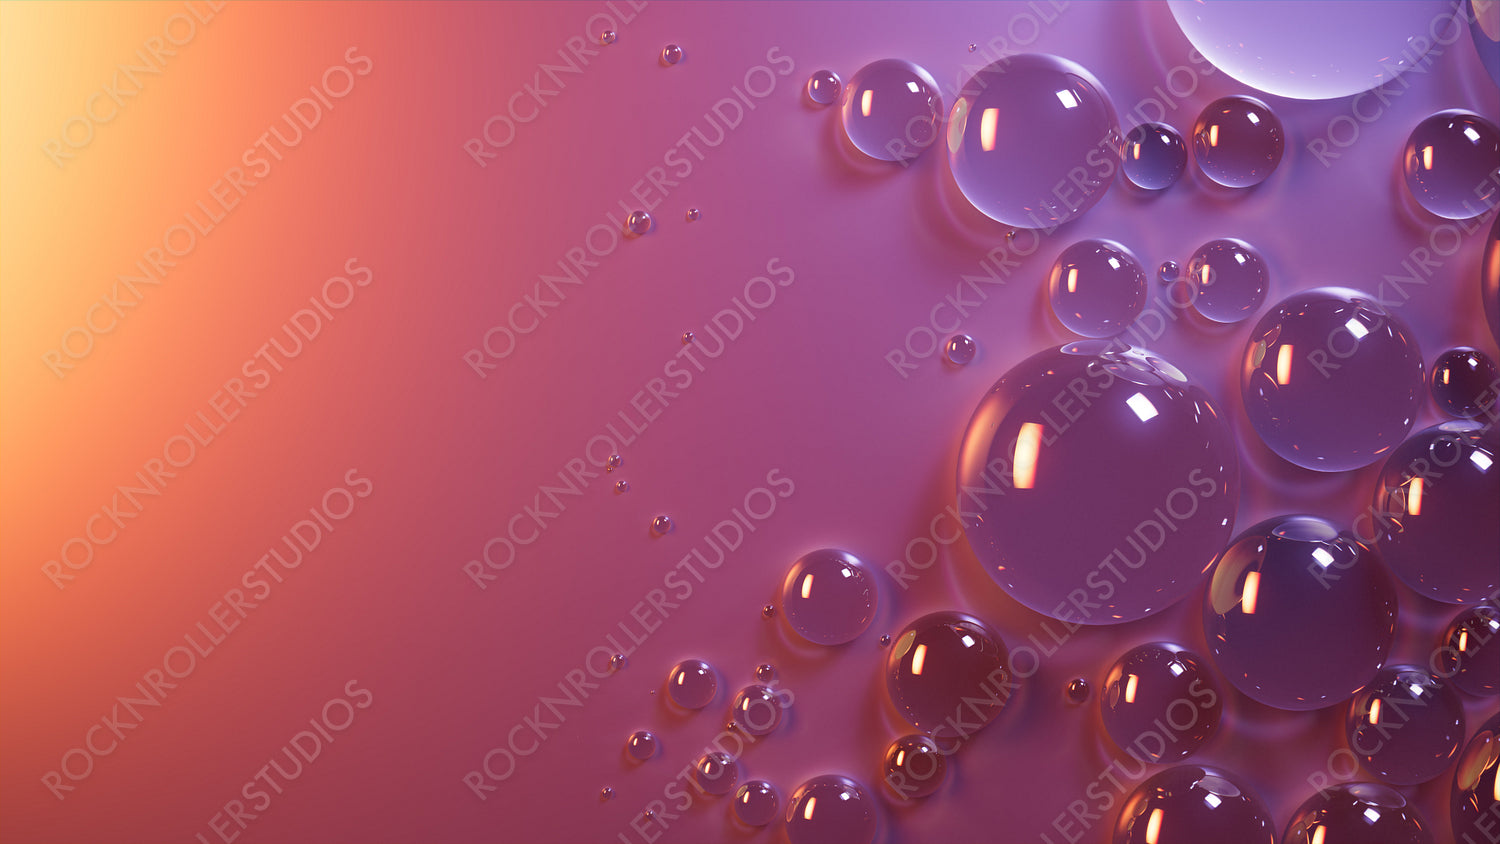 Orange and Violet Background with Liquid Drops on Surface. Modern Wallpaper with Copy-Space.